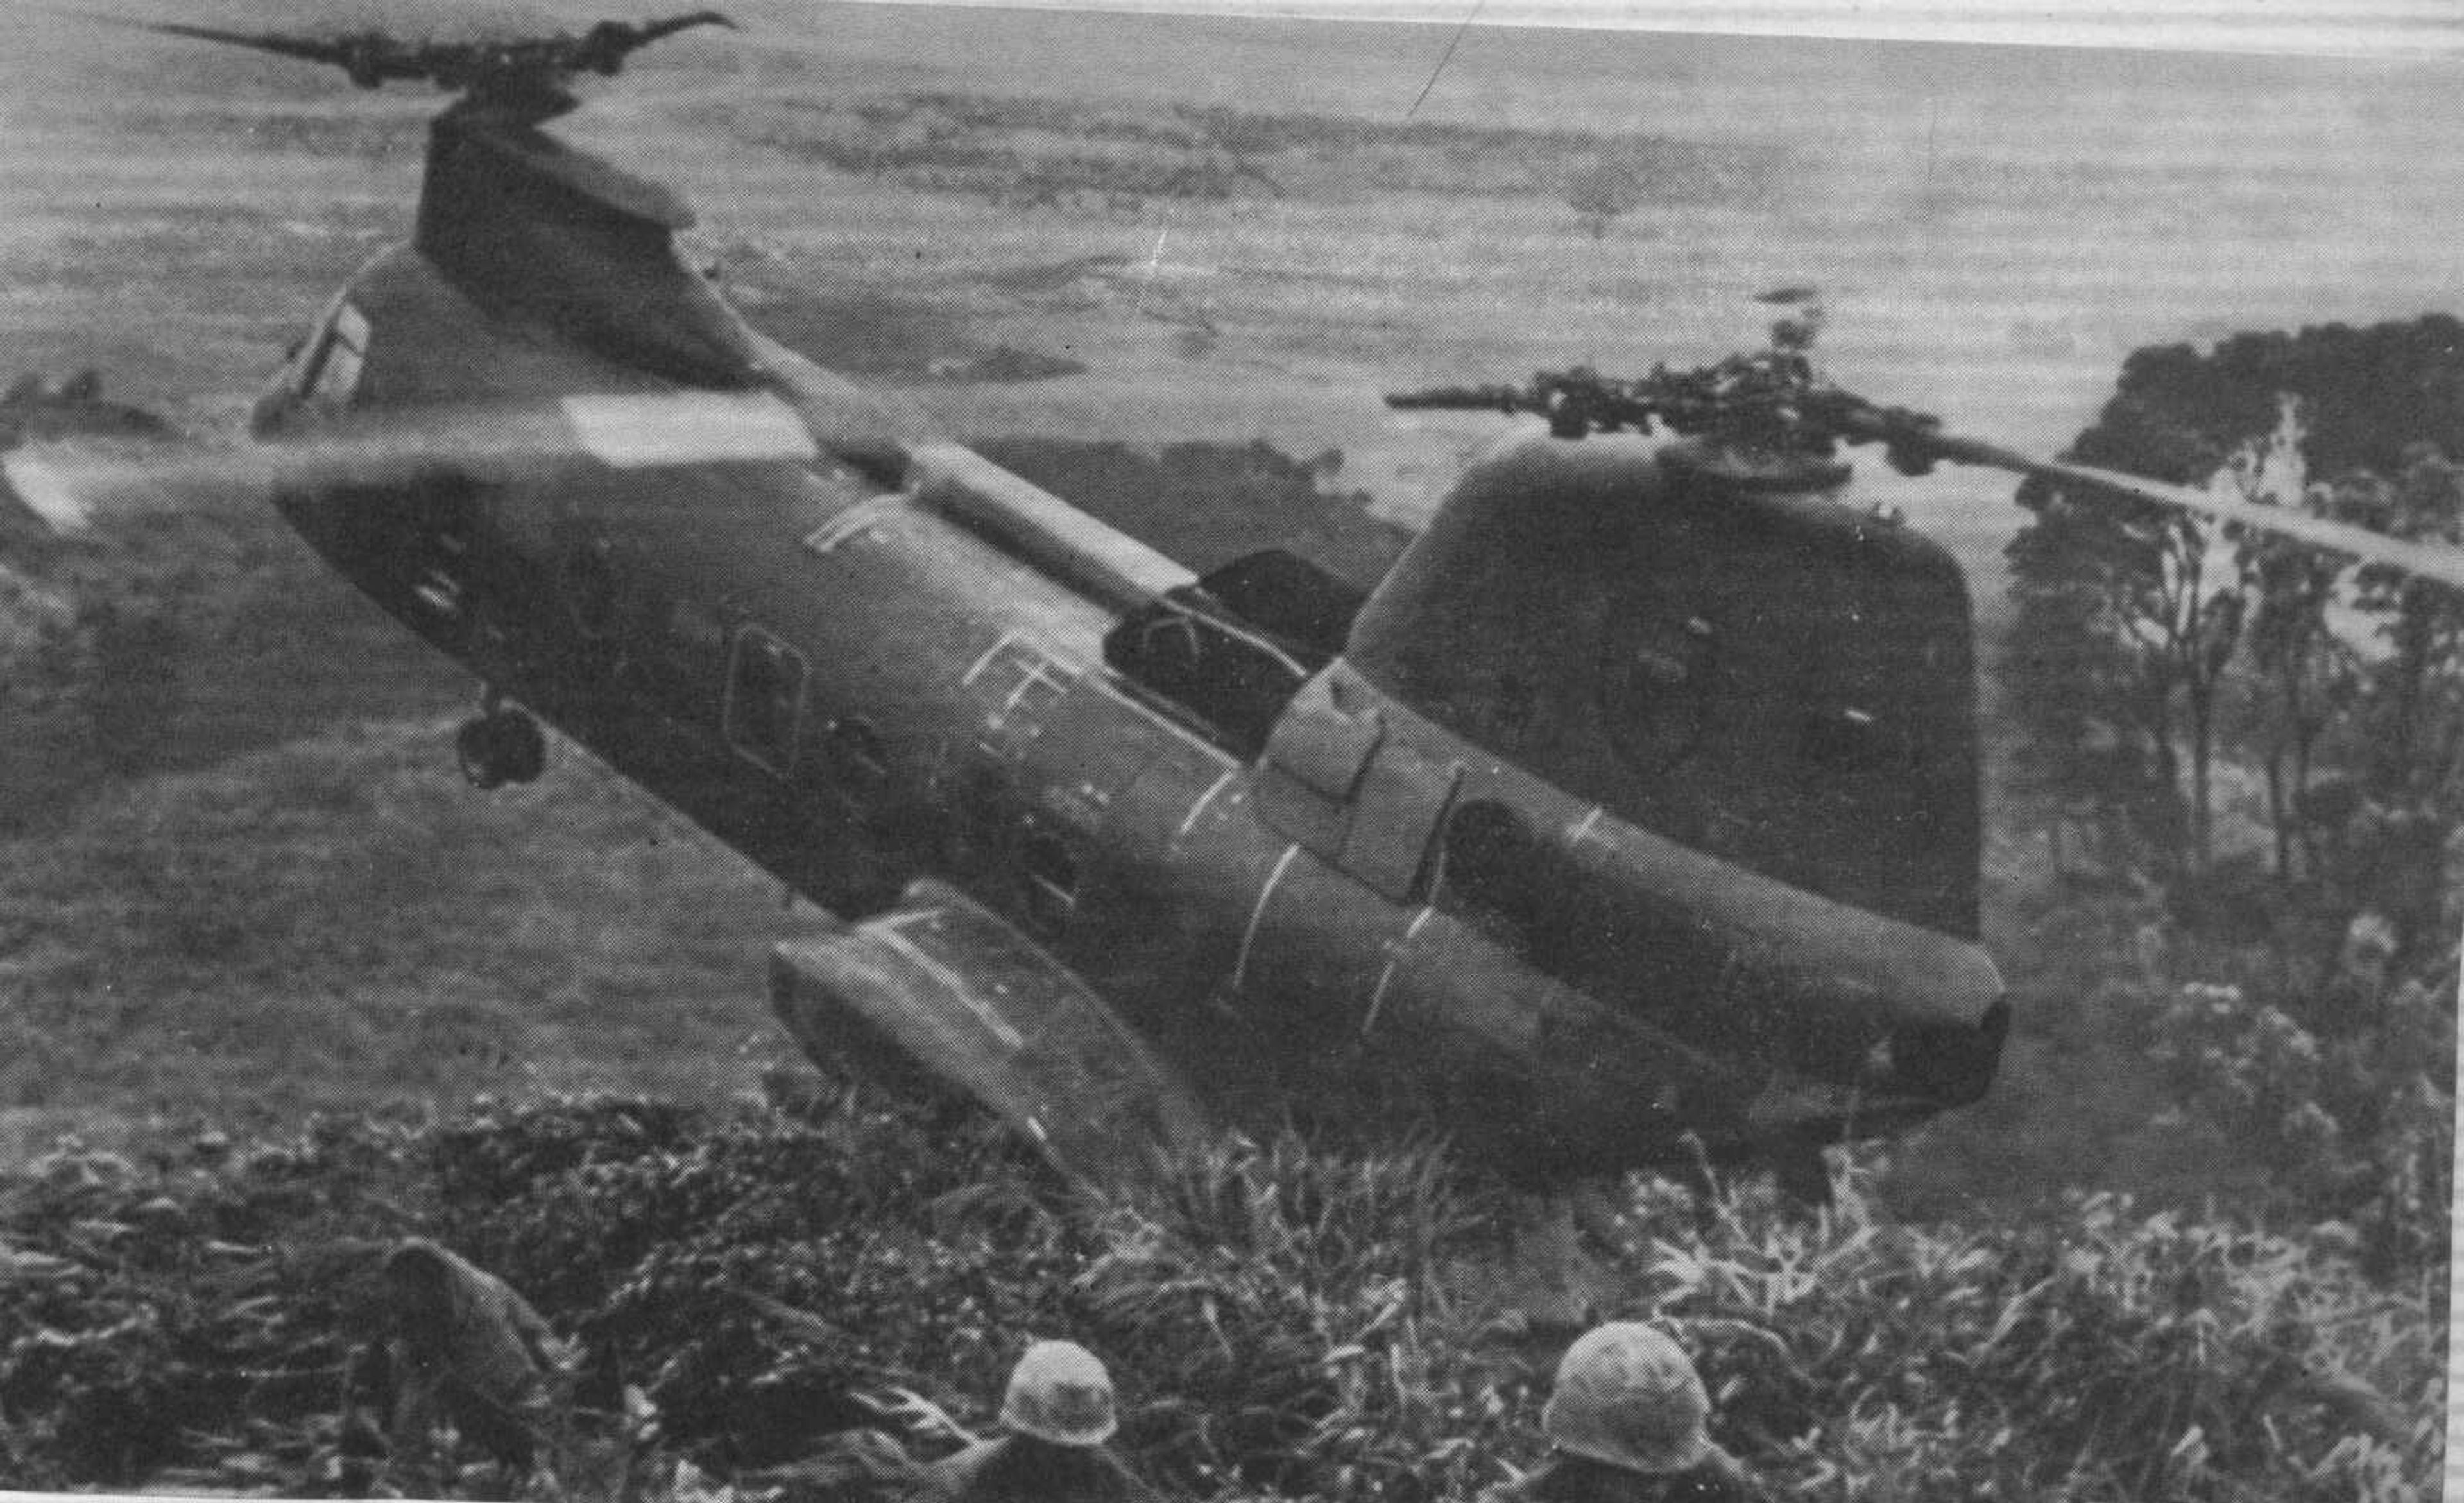 A CH-46 off loading Marines into the Ashua Valley in Vietnam.